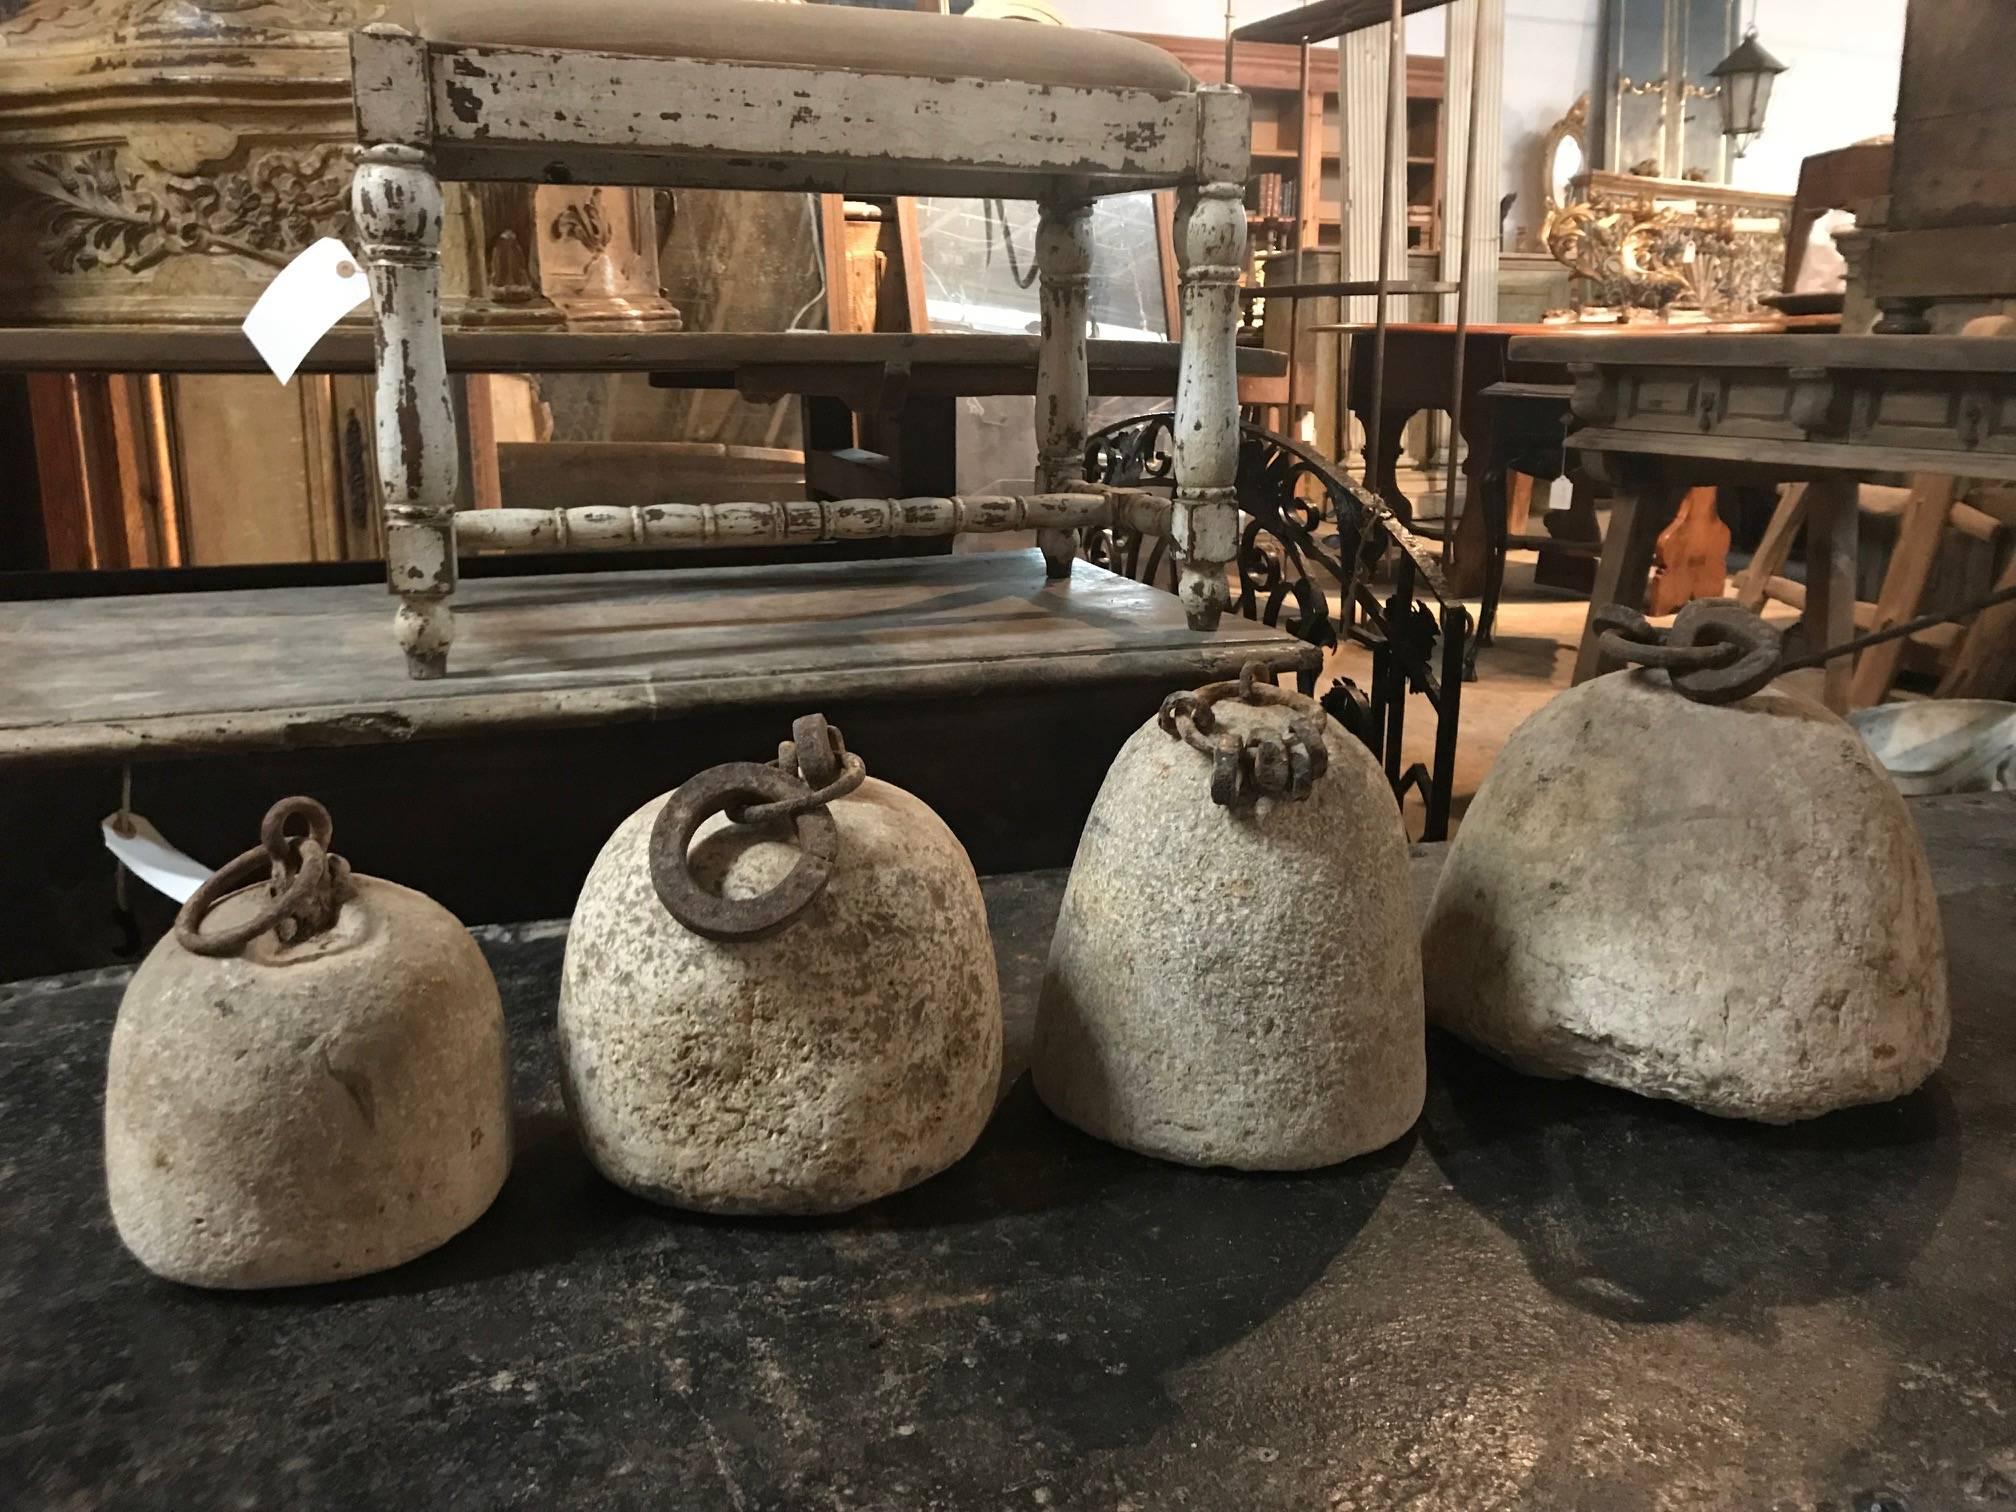 A terrific set of four various sized Spanish 17th century bell tower clock counterweights in stone and iron. A wonderful collection to enhance any tabletop, counter top or bookcase. The counterweights measures largest to smallest: 10